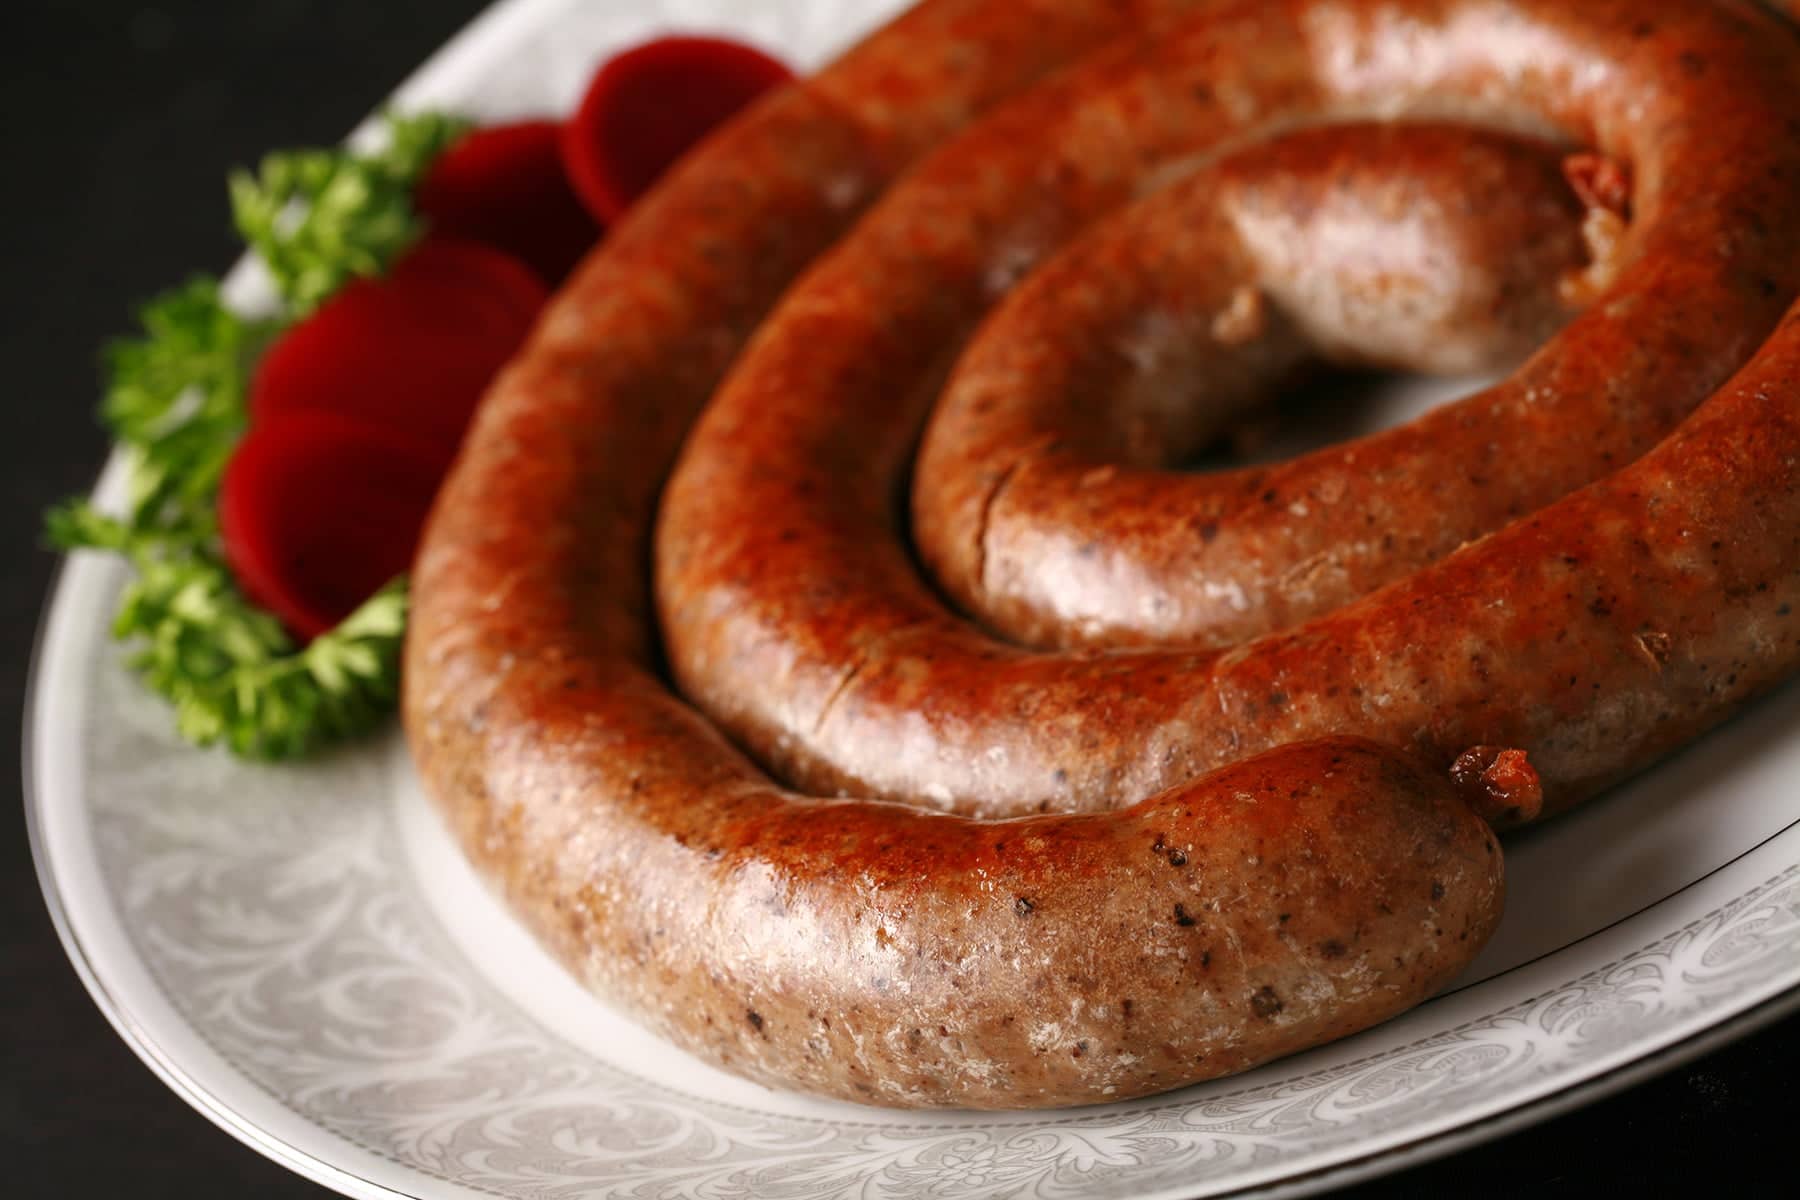 A large coil of potato sausage on a white plate. It’s garnished with slices of beet pickles and some fresh parsley.